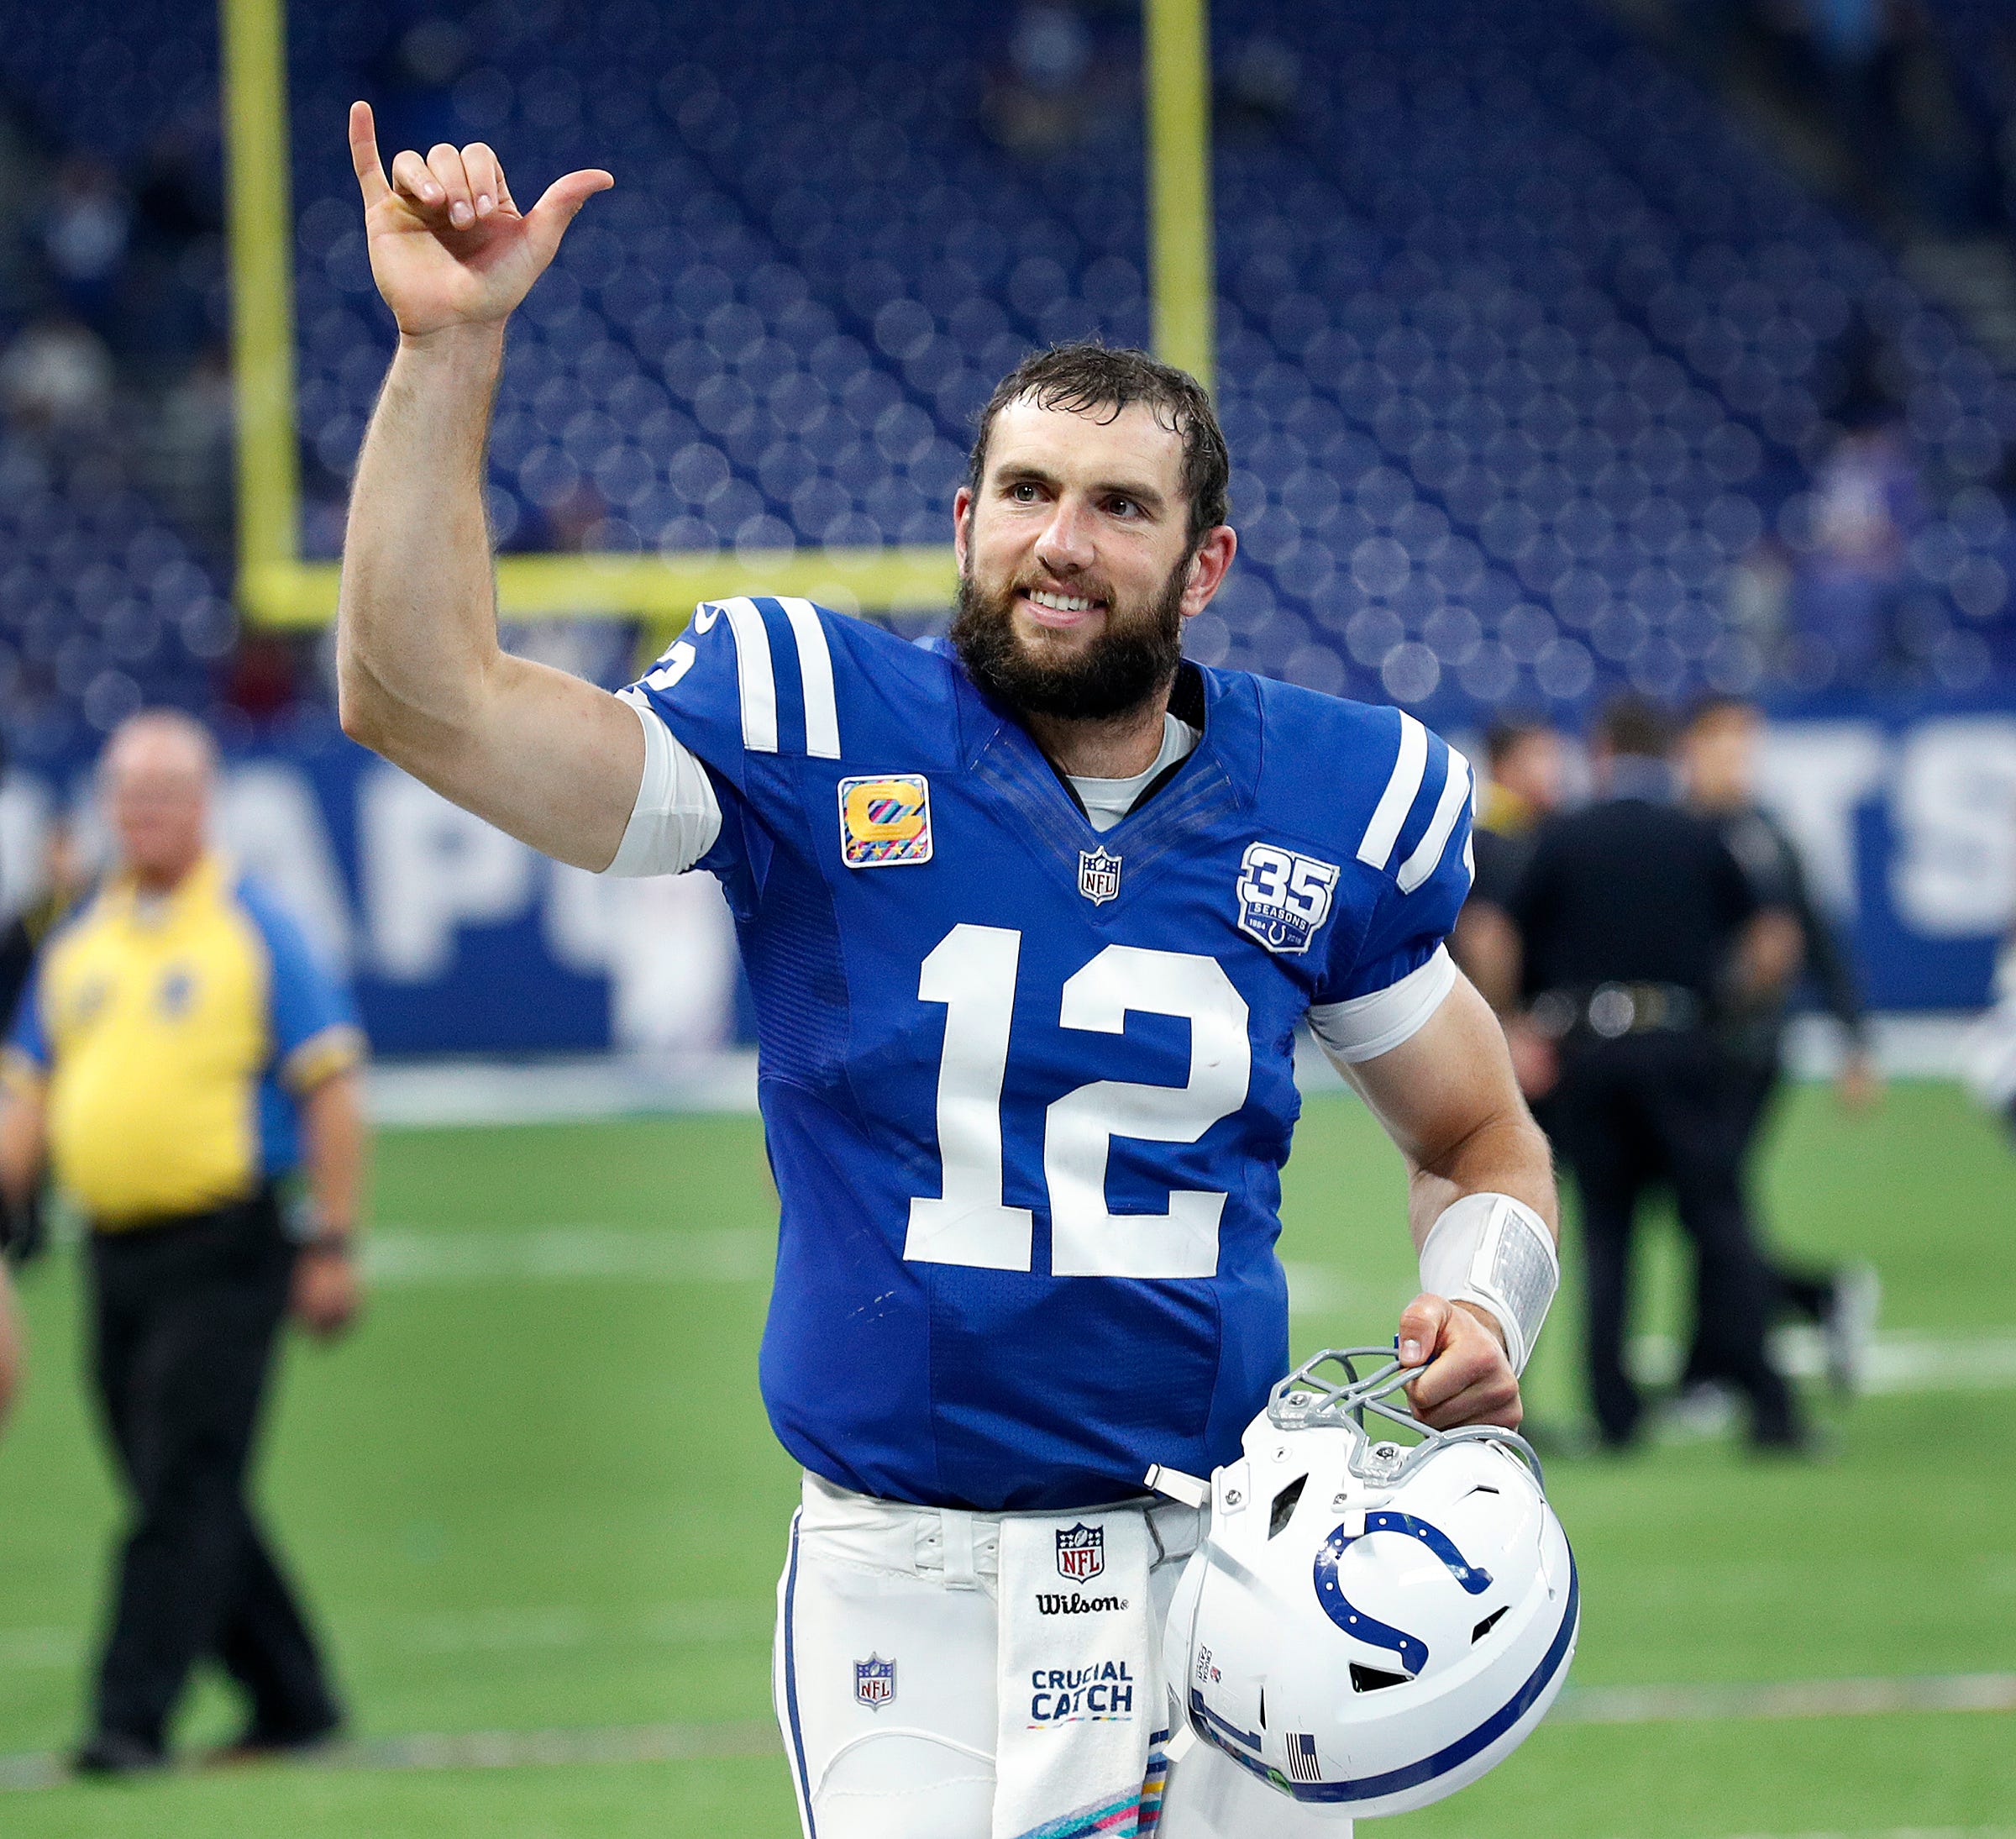 Colts are seeing Andrew Luck 2.0, and 